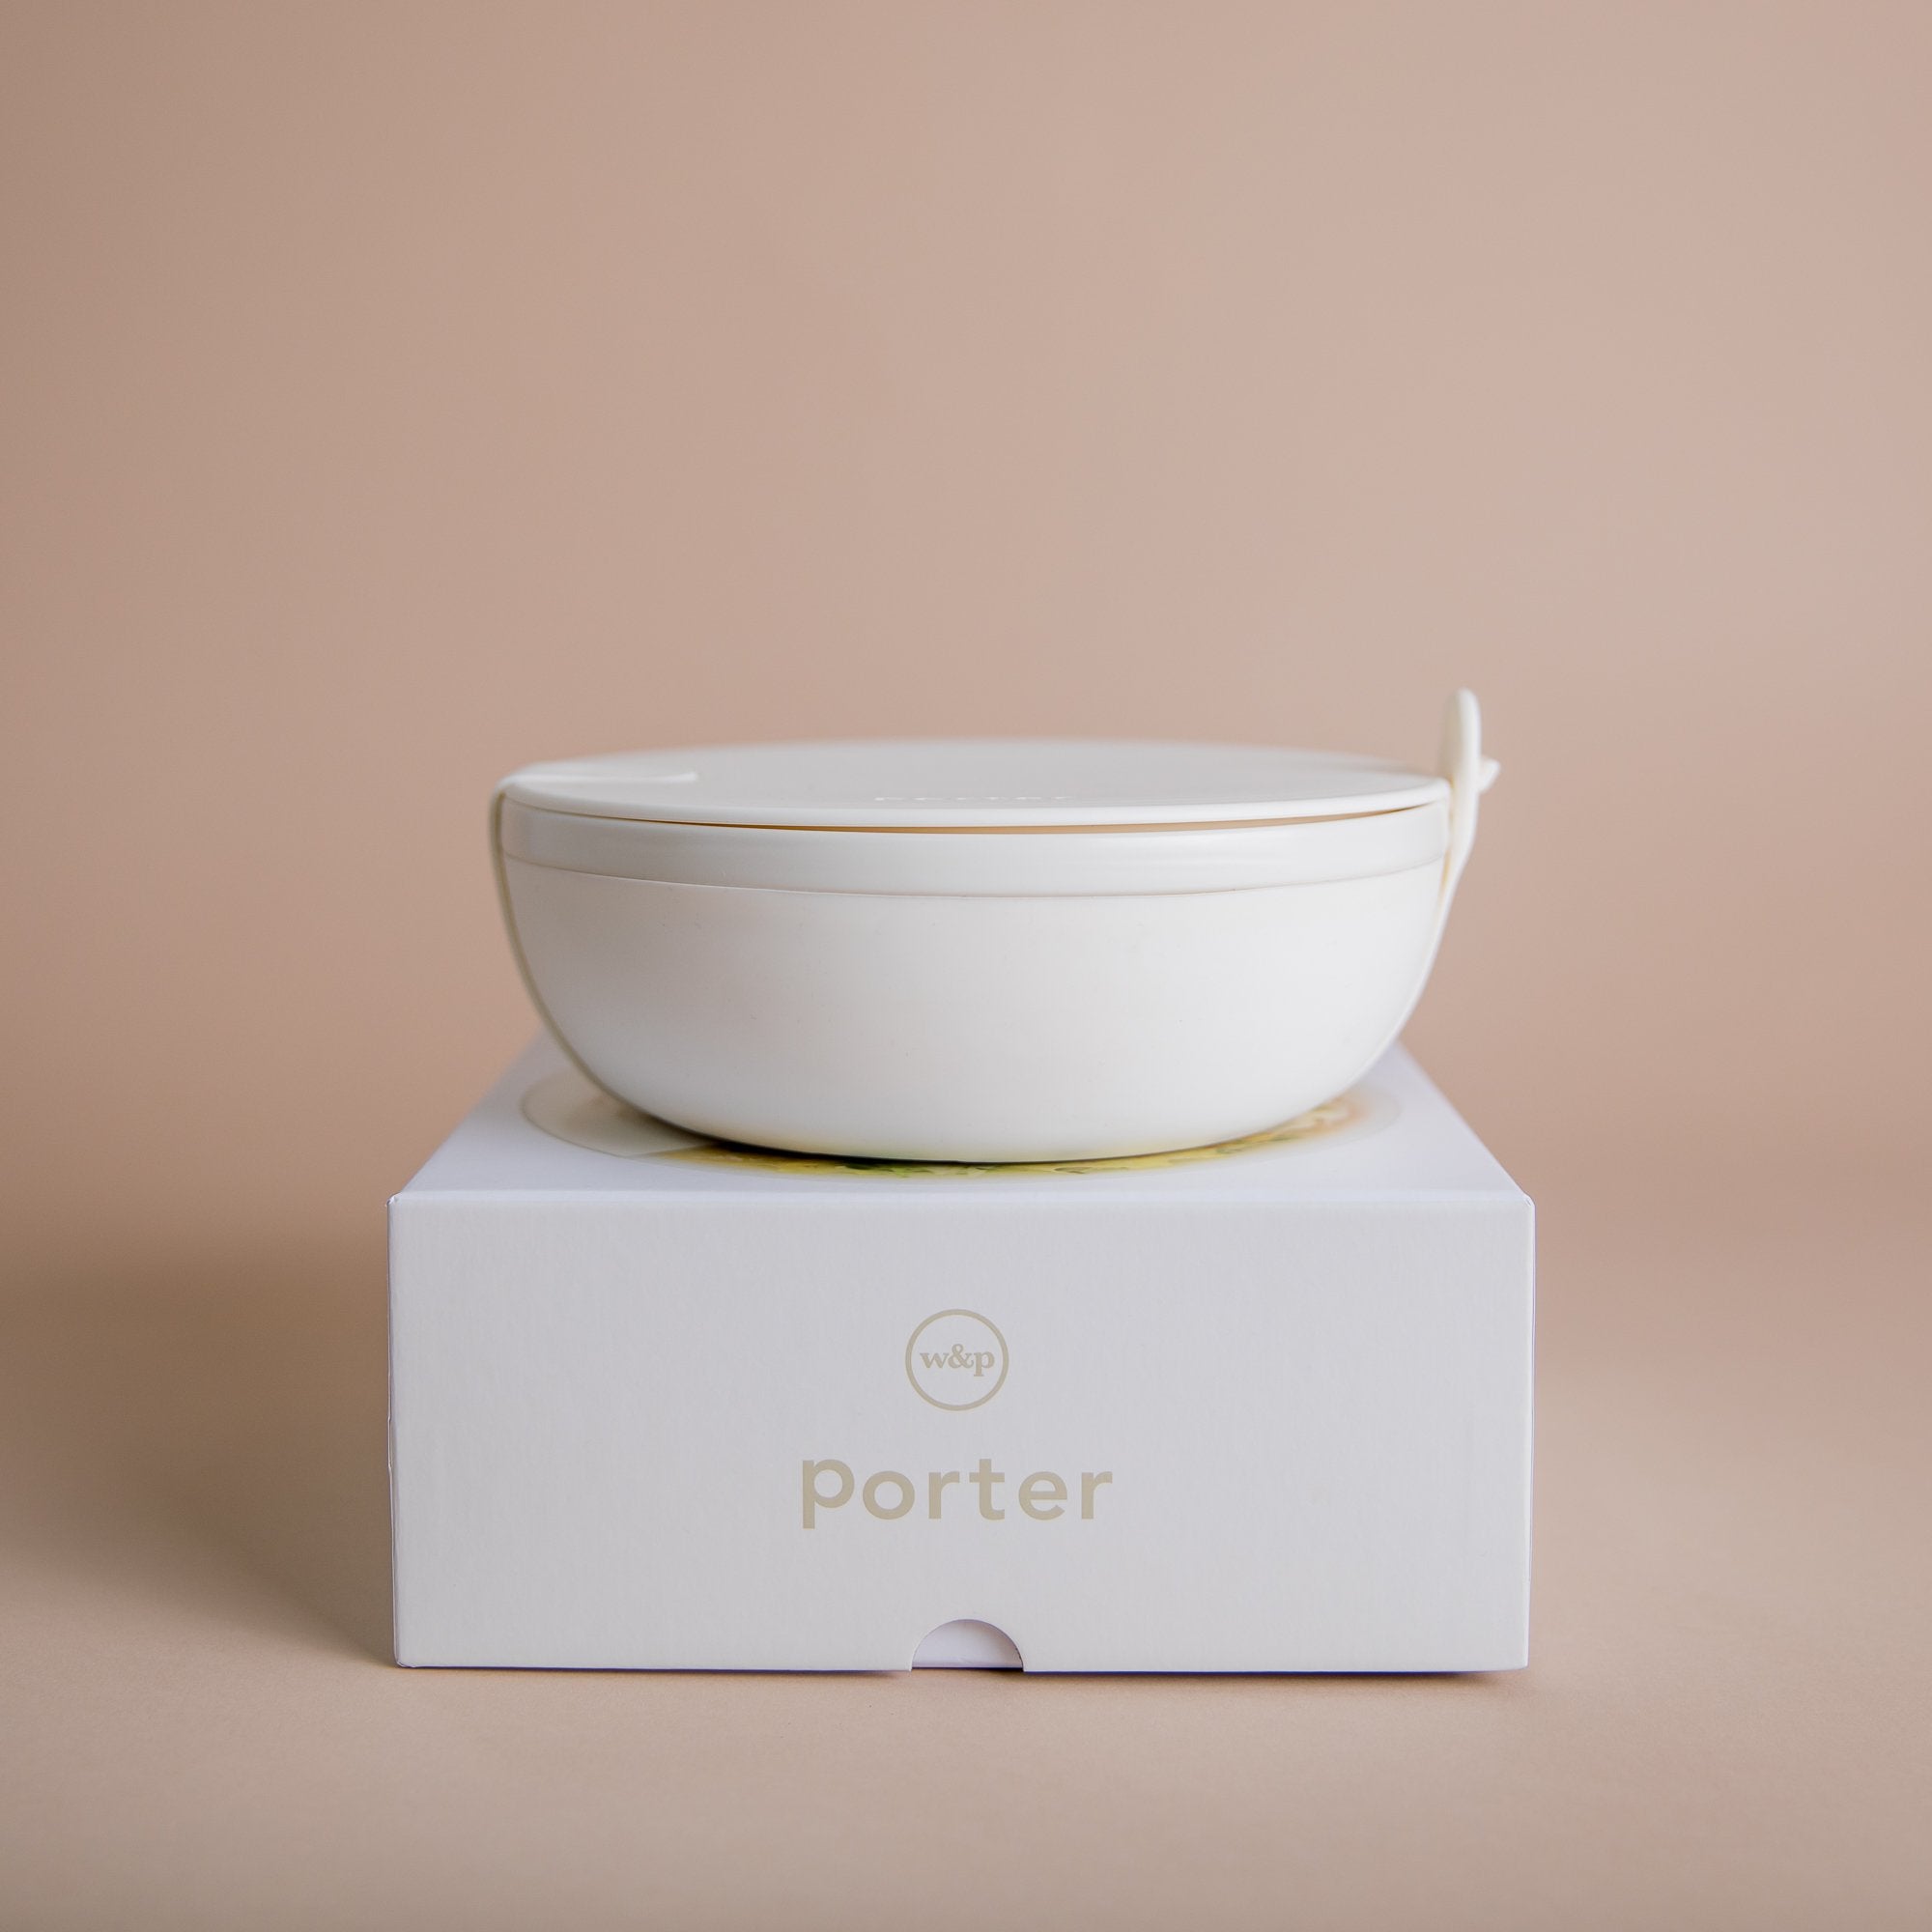 W&P Porter Bowl Ceramic Bowl with Silicone Sleeve - NEW